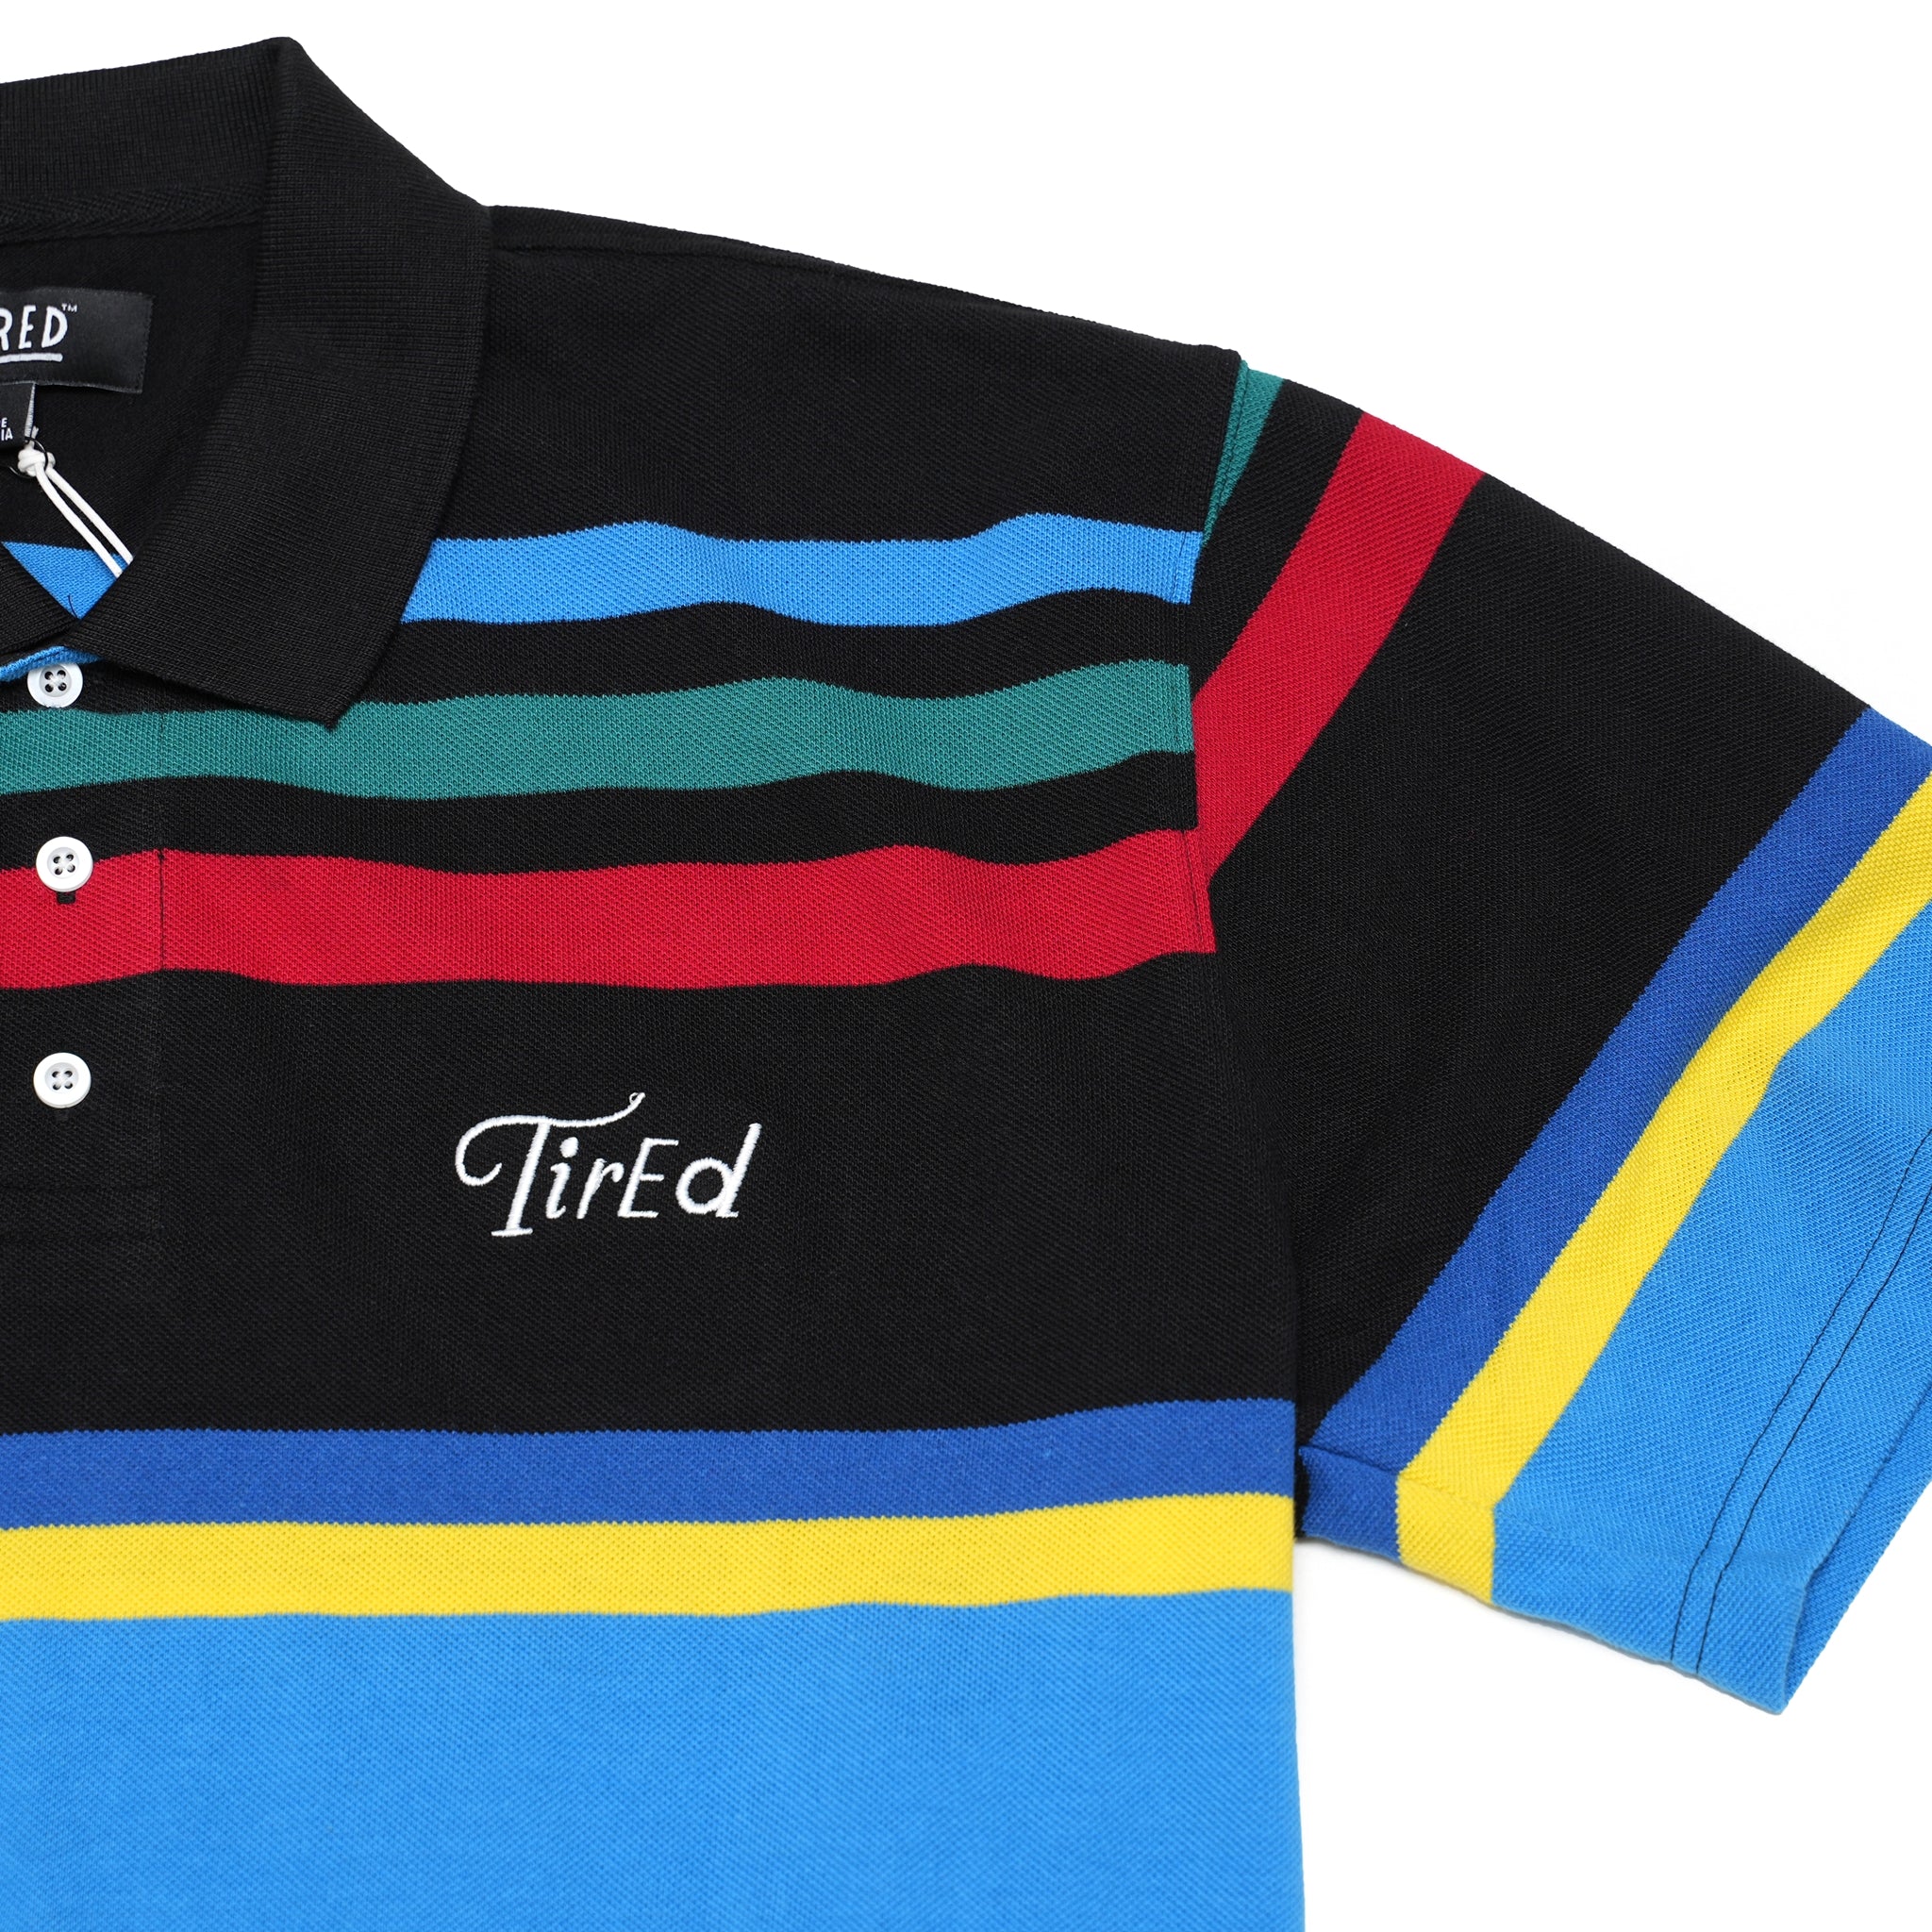 No:TS00176 | Name:STRIPED POLO | Color:Multi【TIRED_タイレッド】